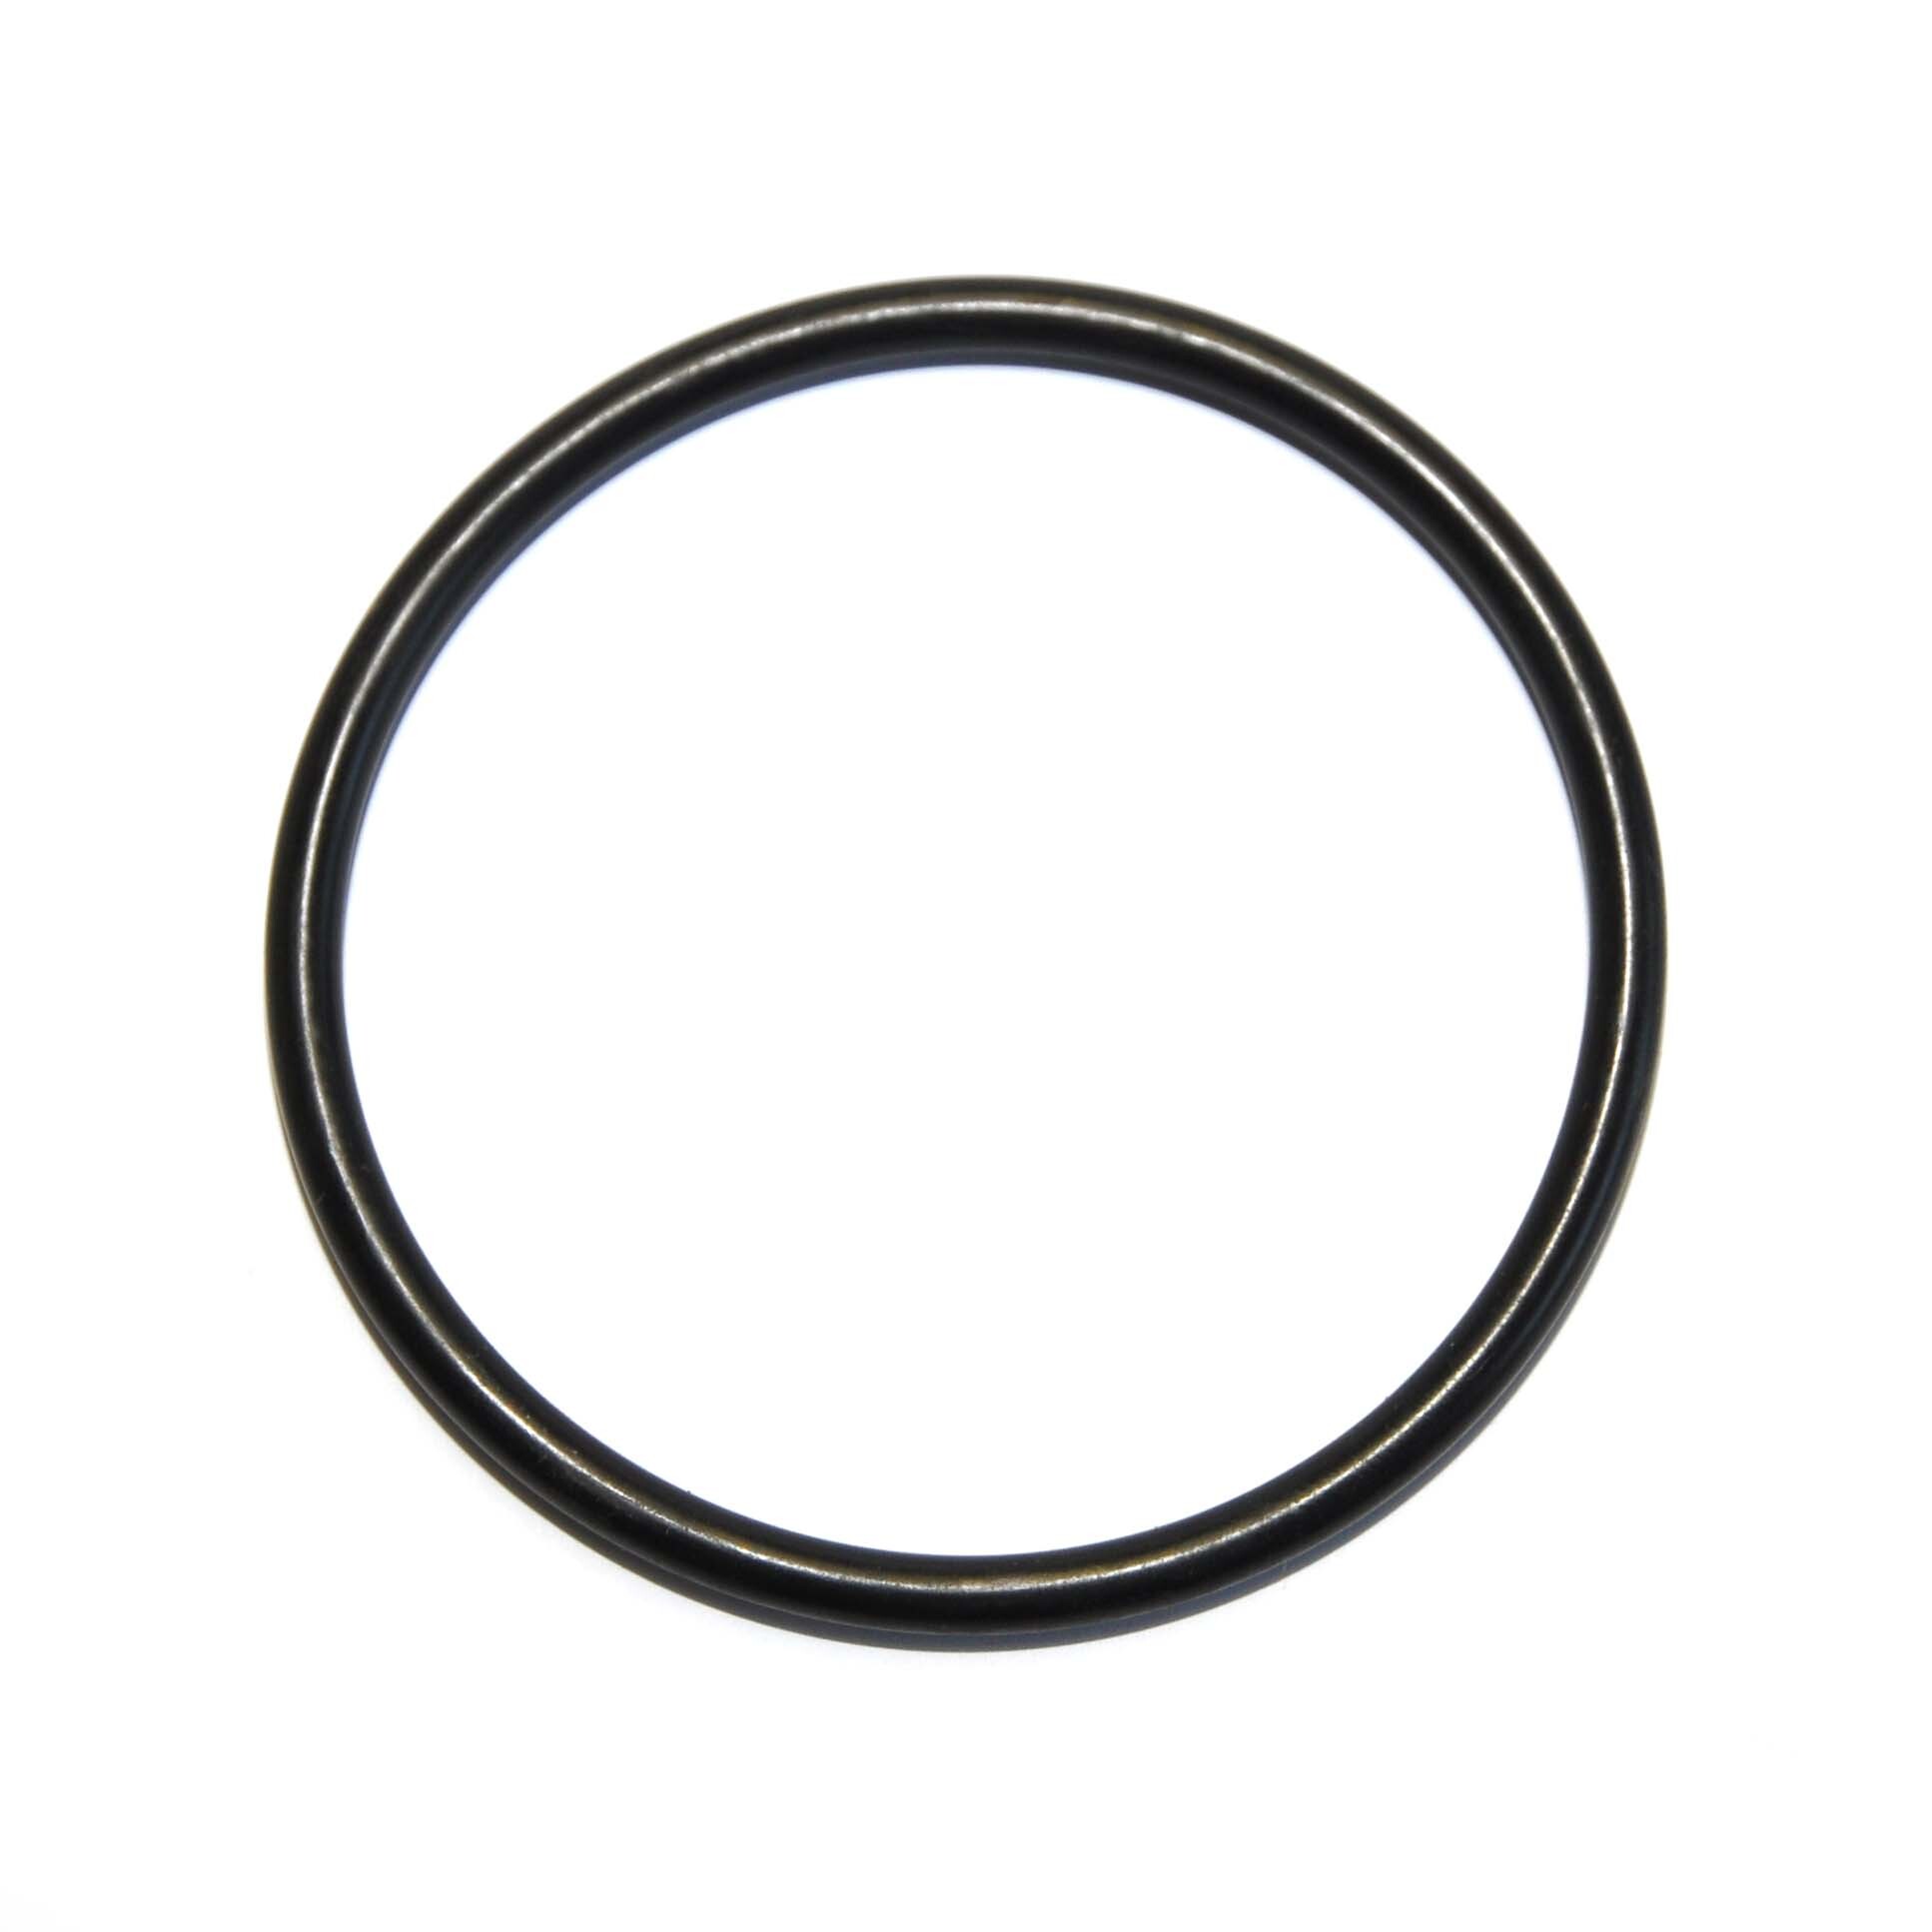 O-ring NBR70, 72.2 x 5.7 mm for test pipe